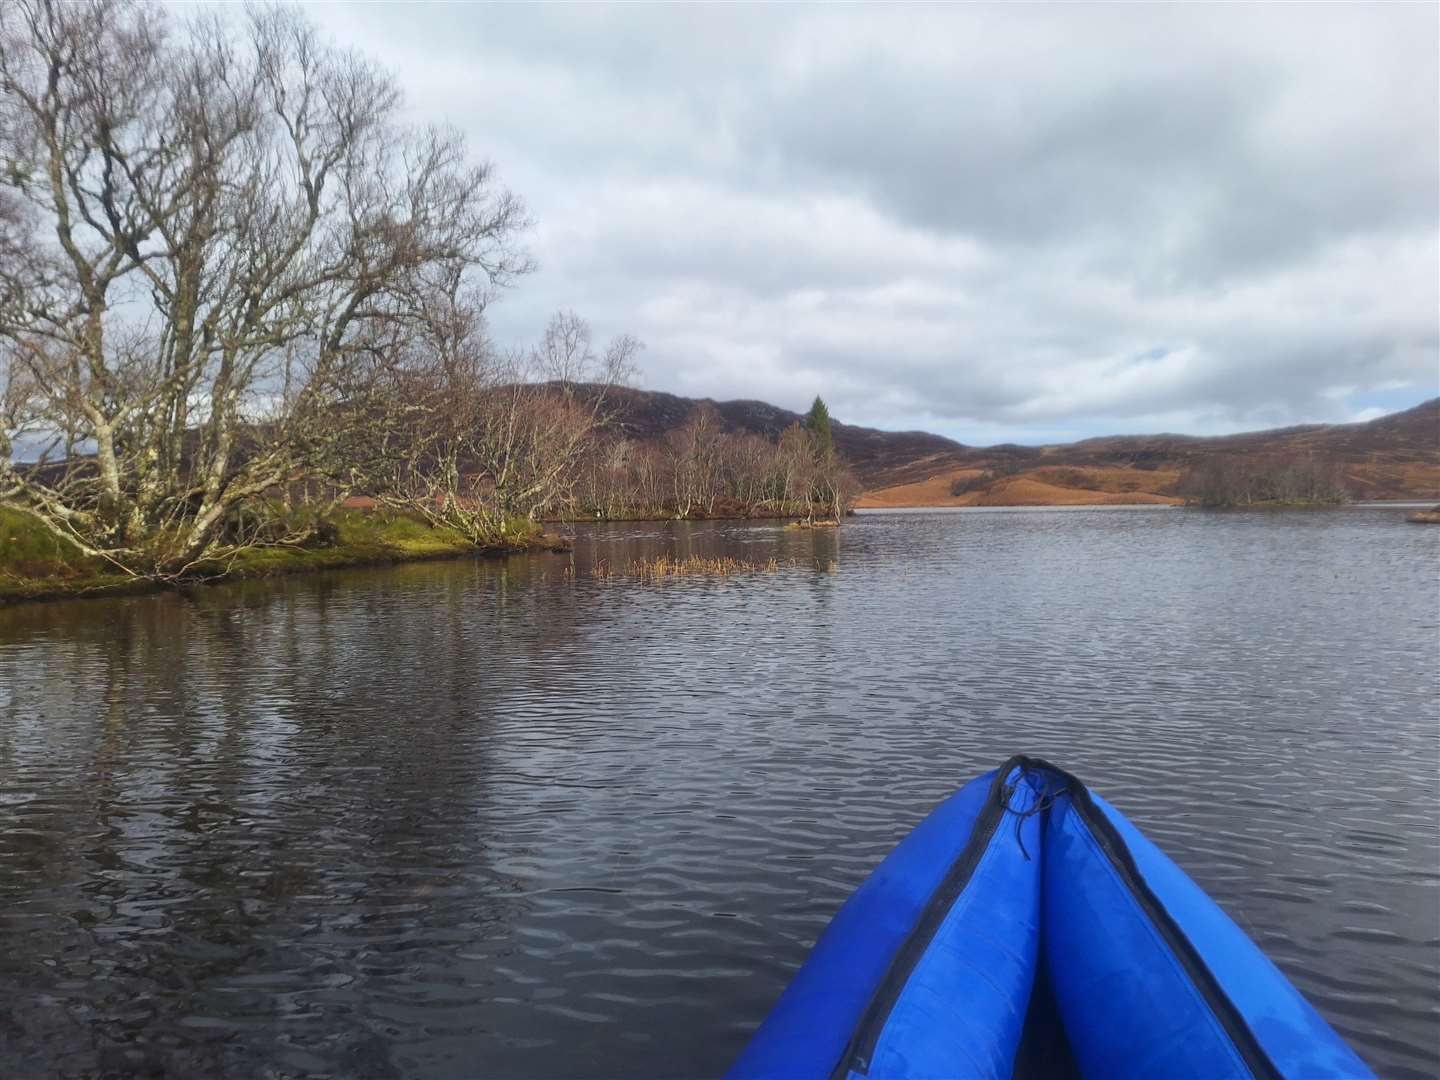 Paddling past the islands at the southern end of the loch.